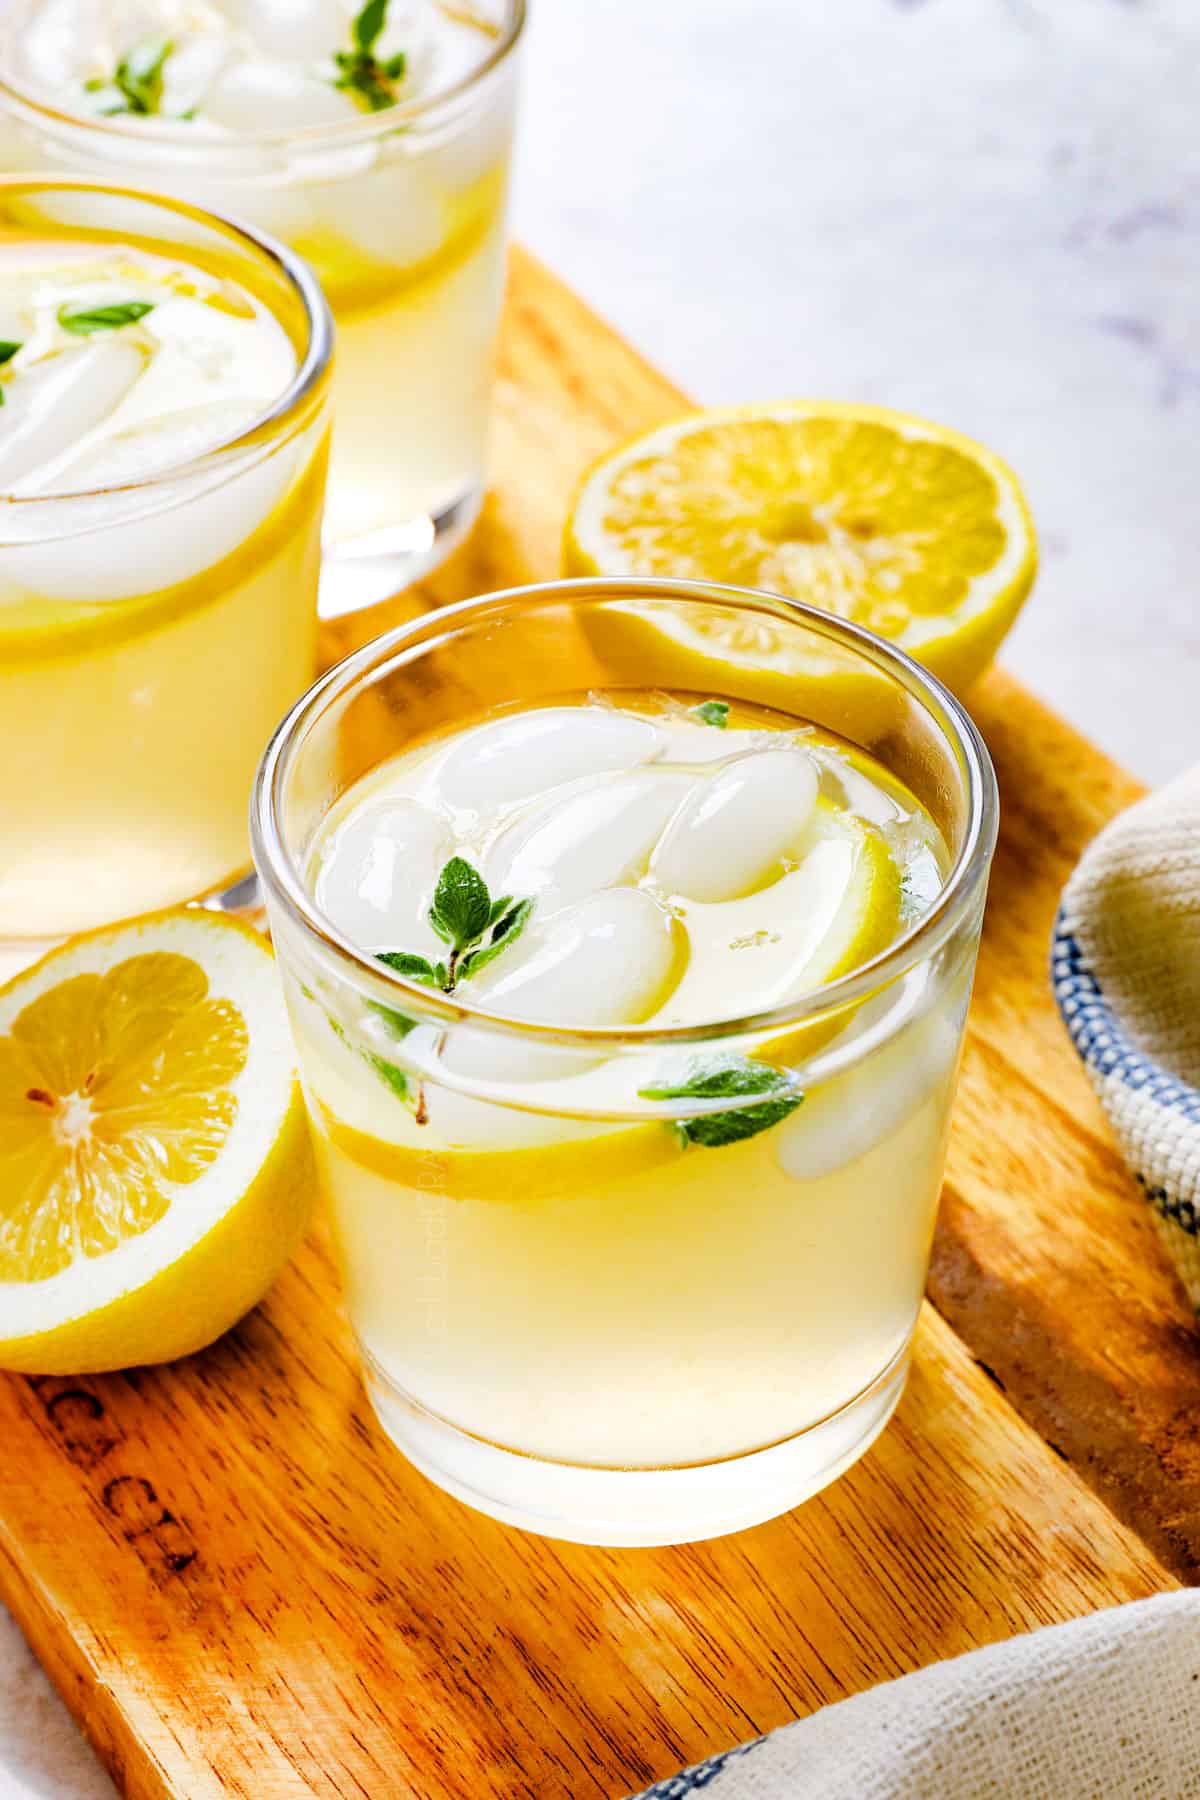 showing how to serve homemade lemonade in a glass with ice